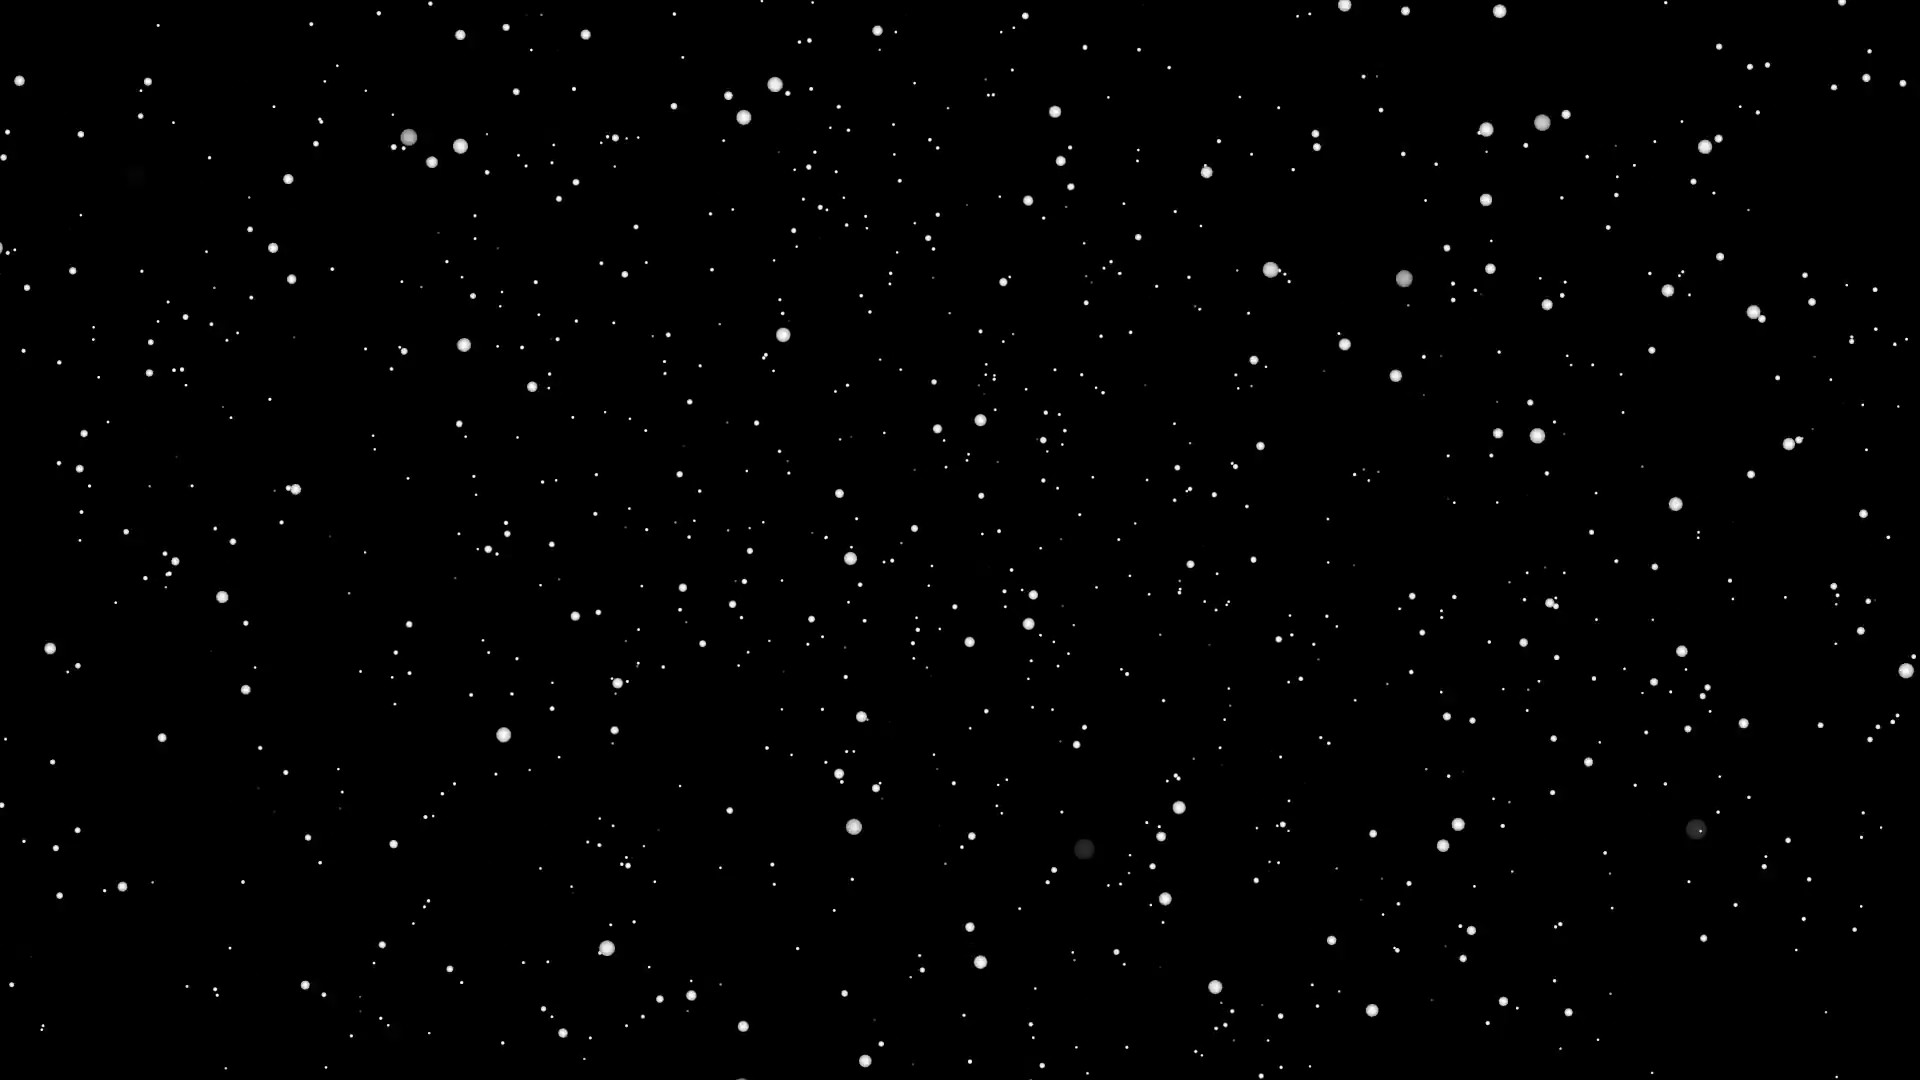 Star Wars Space Background Image